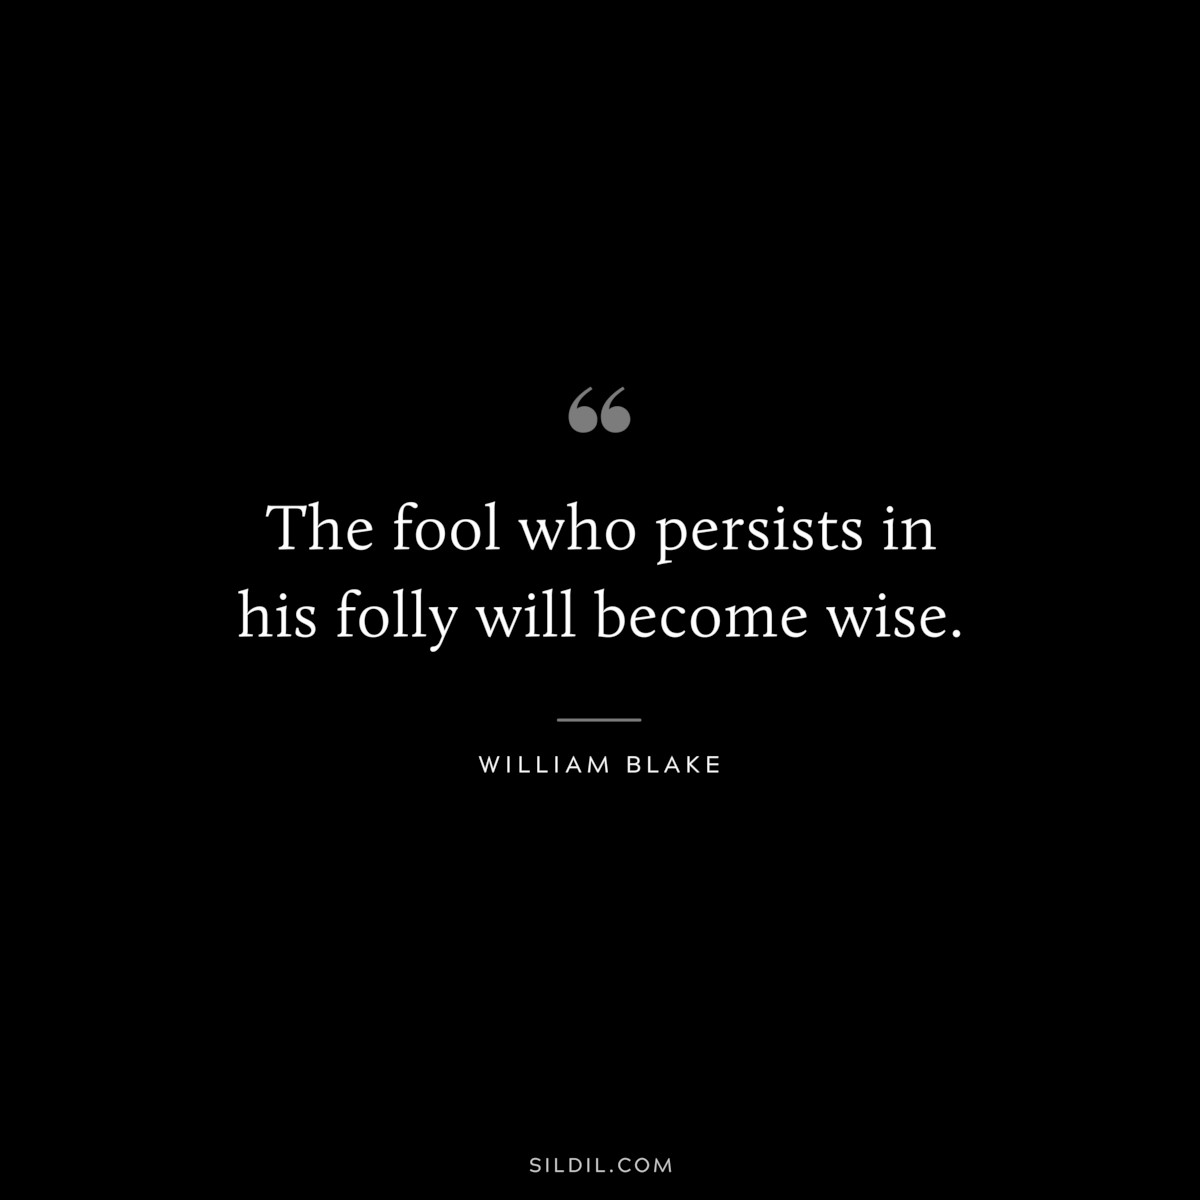 The fool who persists in his folly will become wise. ― William Blake